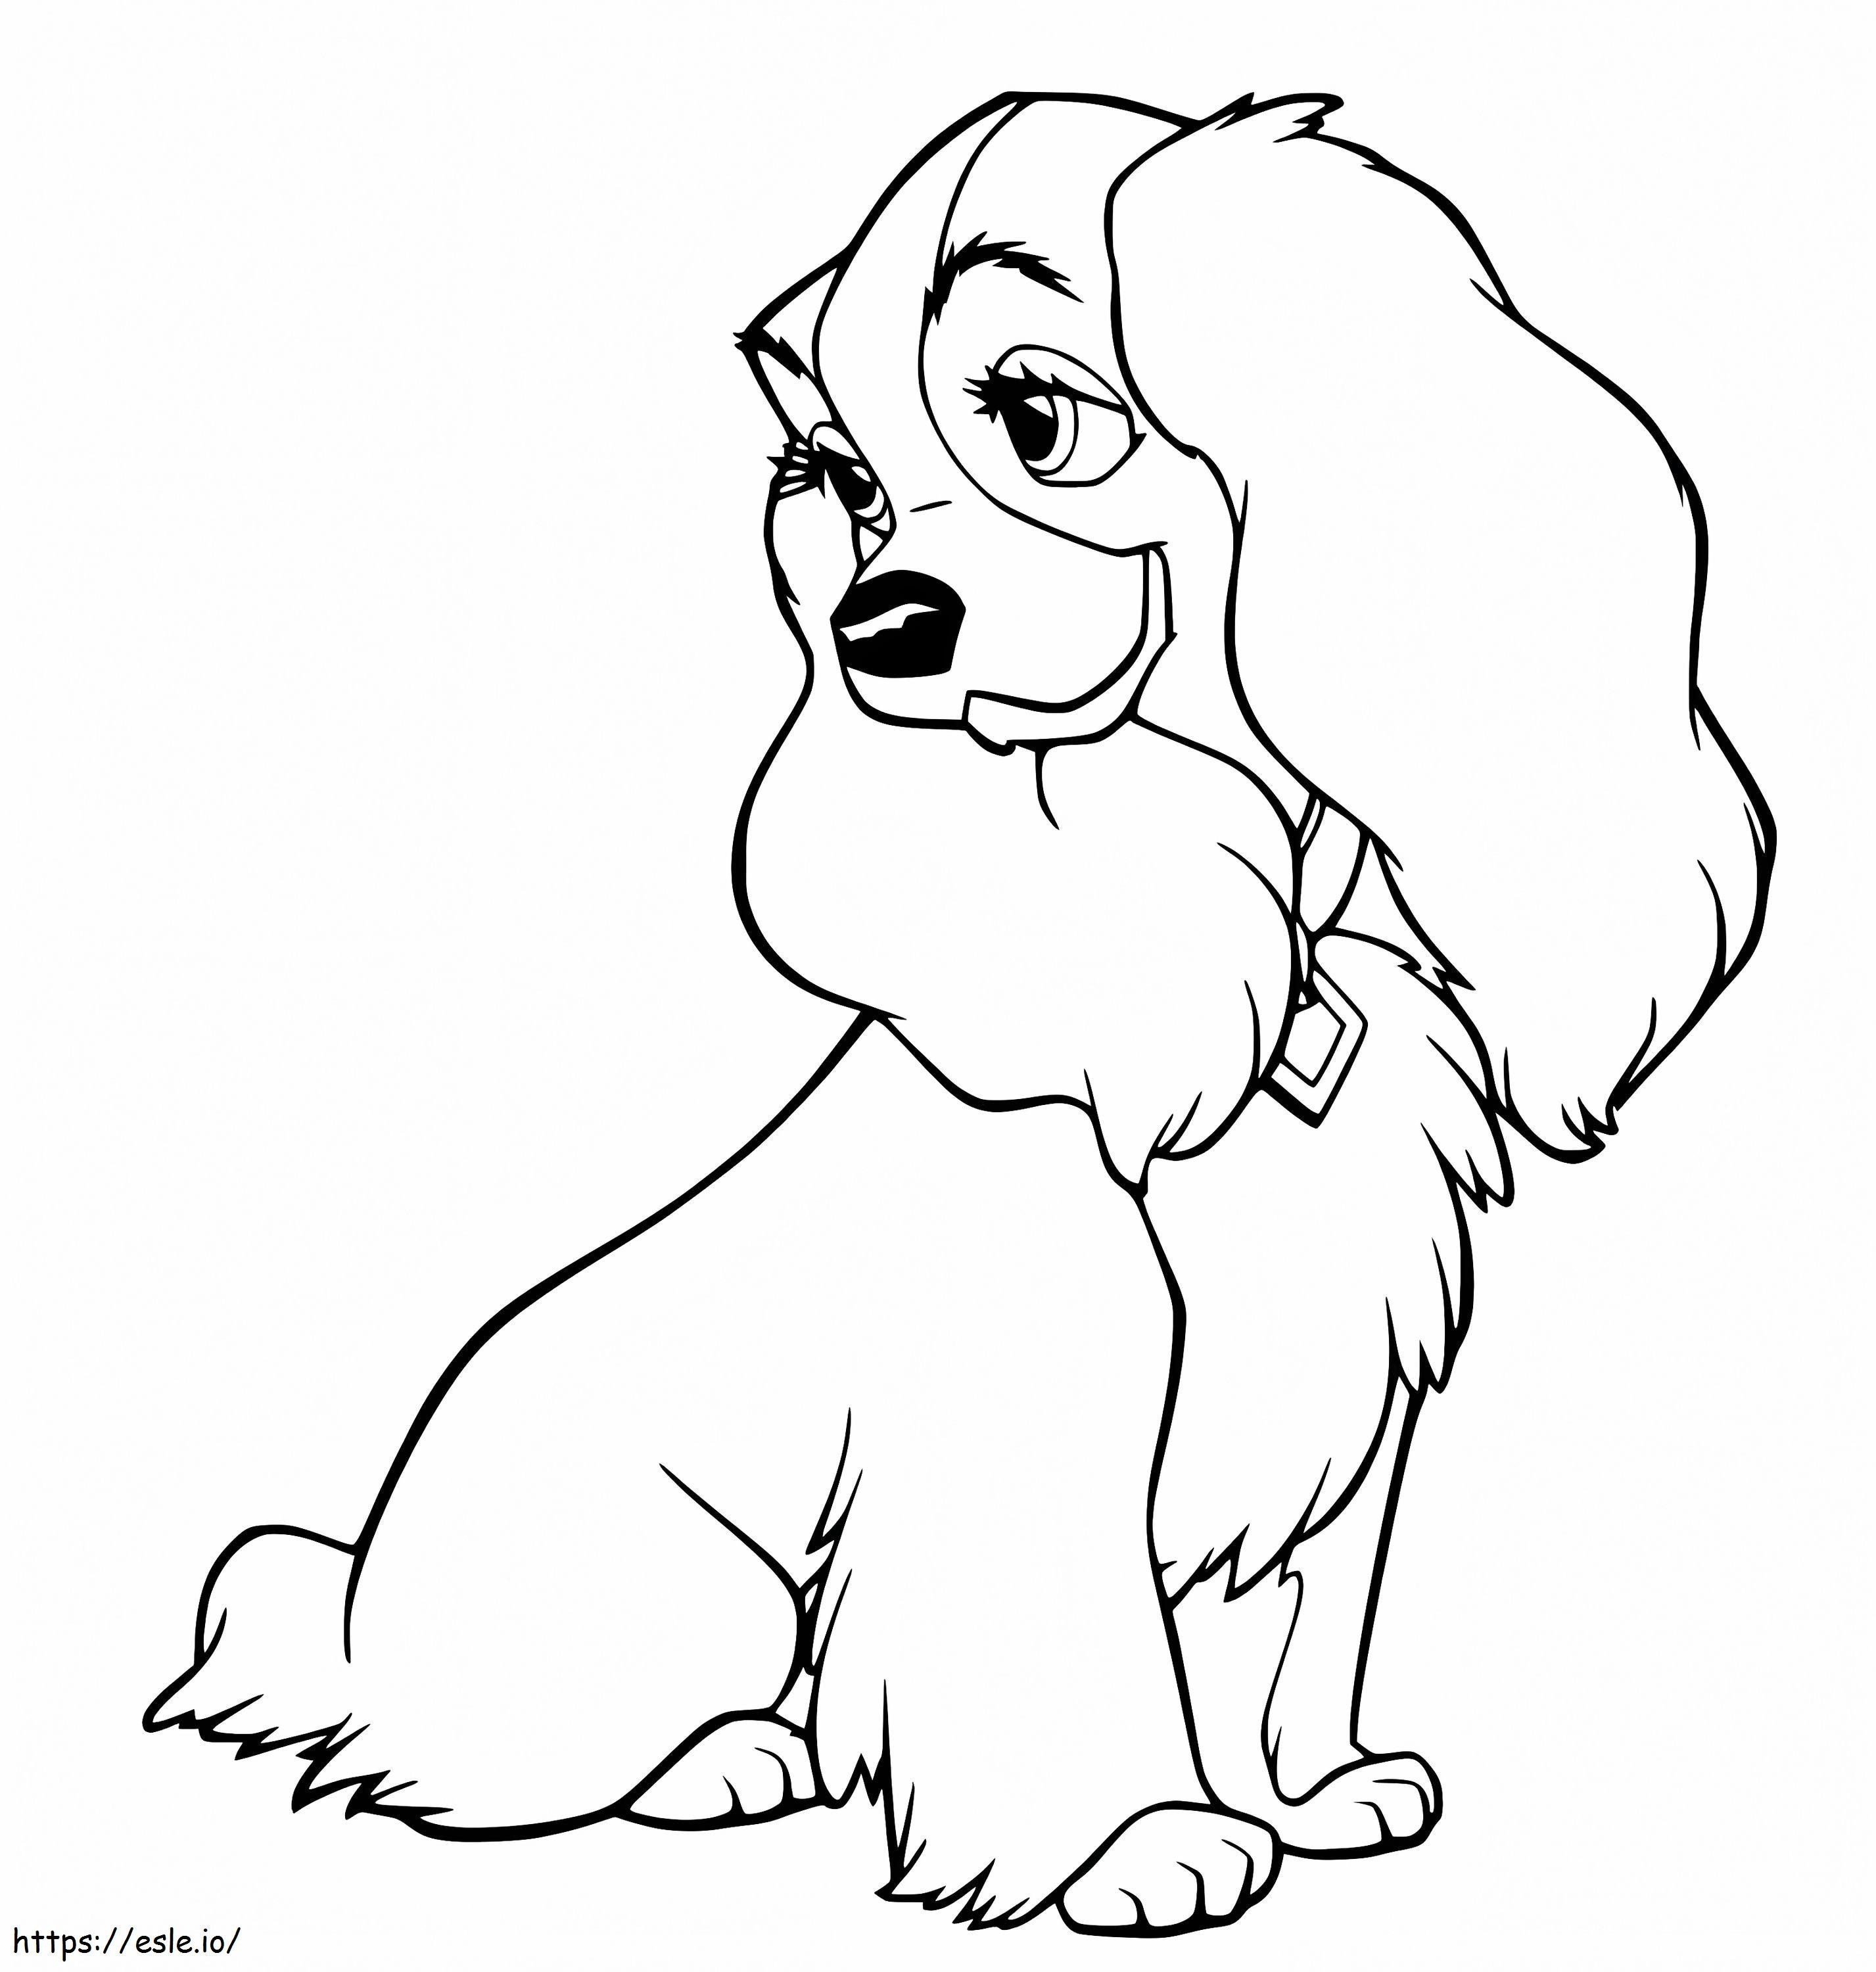 Lady Is Pretty coloring page